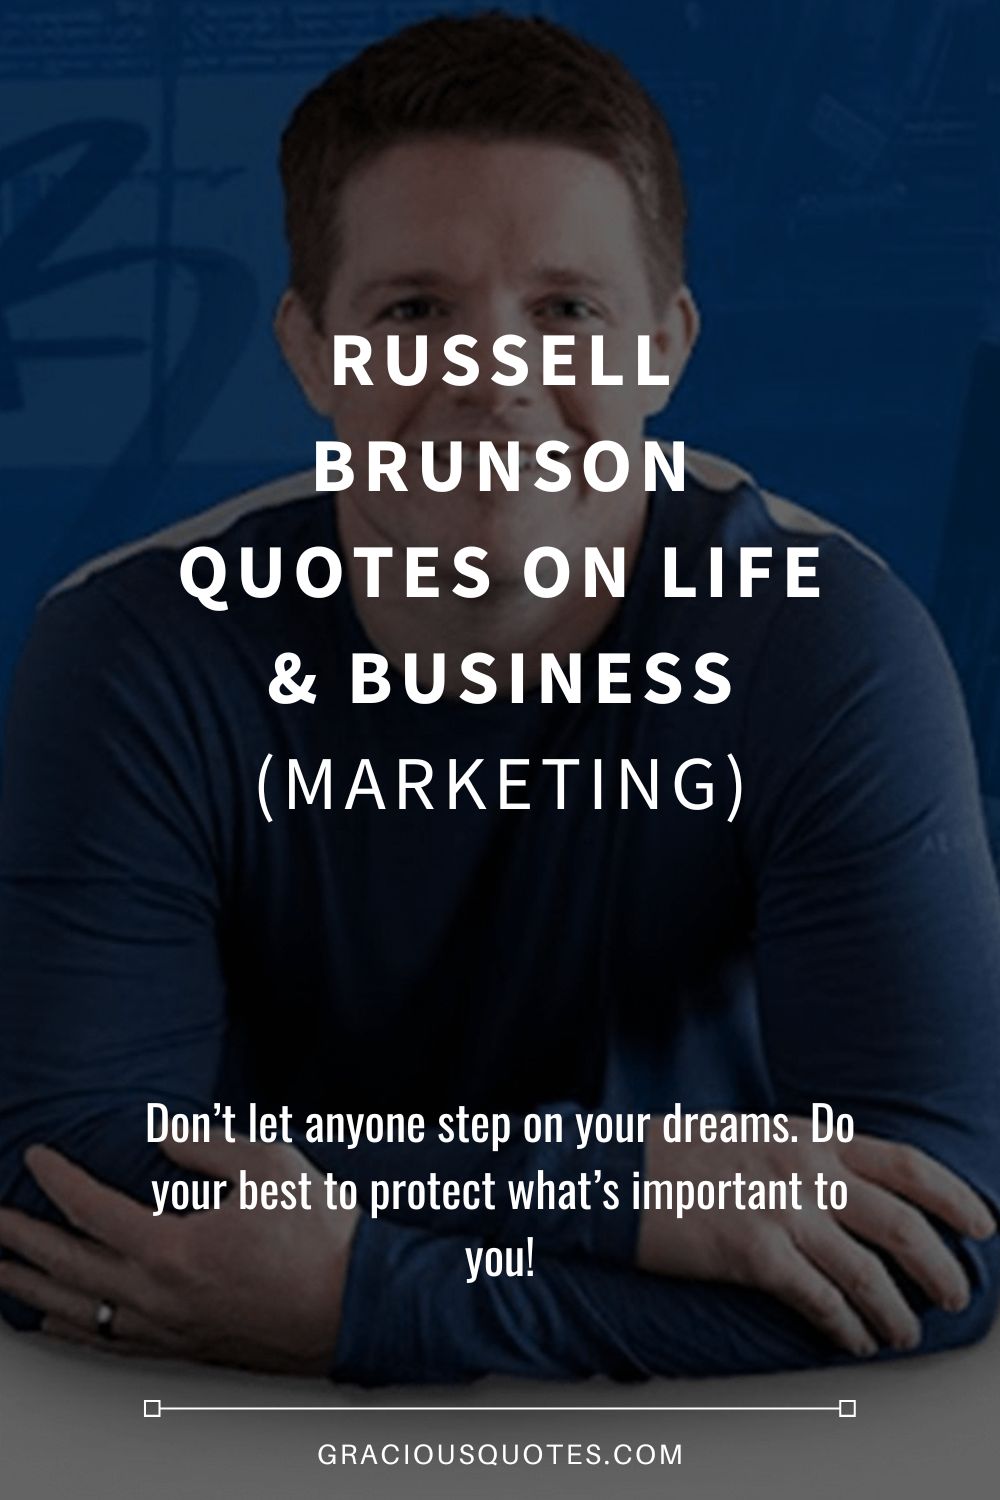 Russell Brunson Quotes on Life & Business (MARKETING) - Gracious Quotes